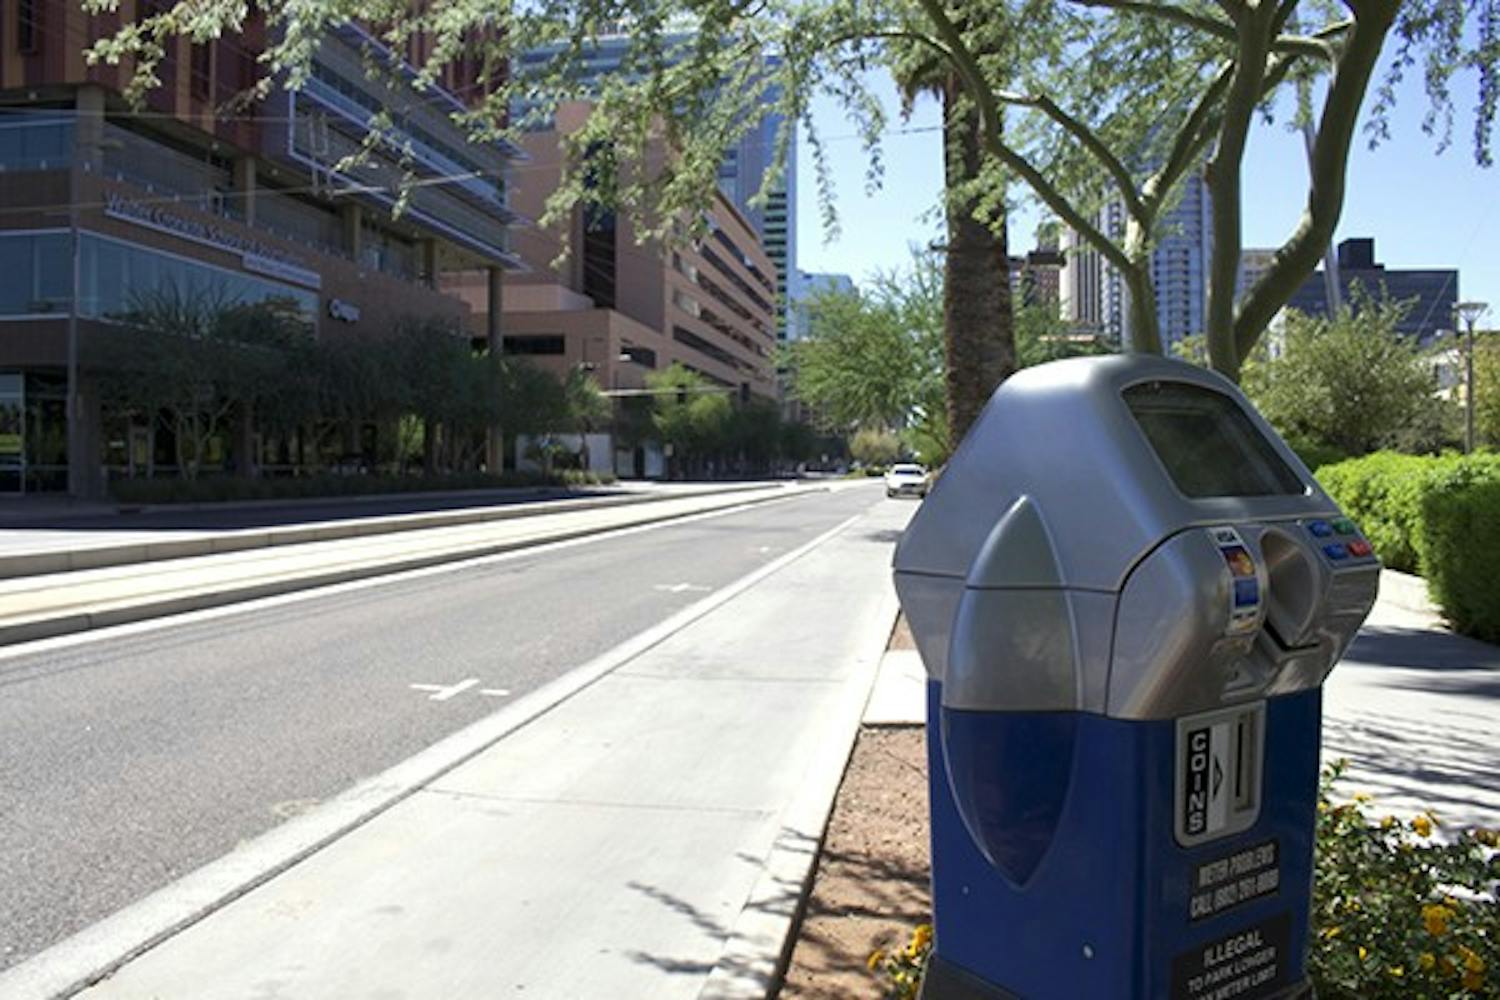 Phoenix will implement demand-based parking meter pricing. Smart-meters, which accept credit cards and coins, will be installed in designated parking zones across the city by the end of 2014. (Photo by Andrew Nicla)